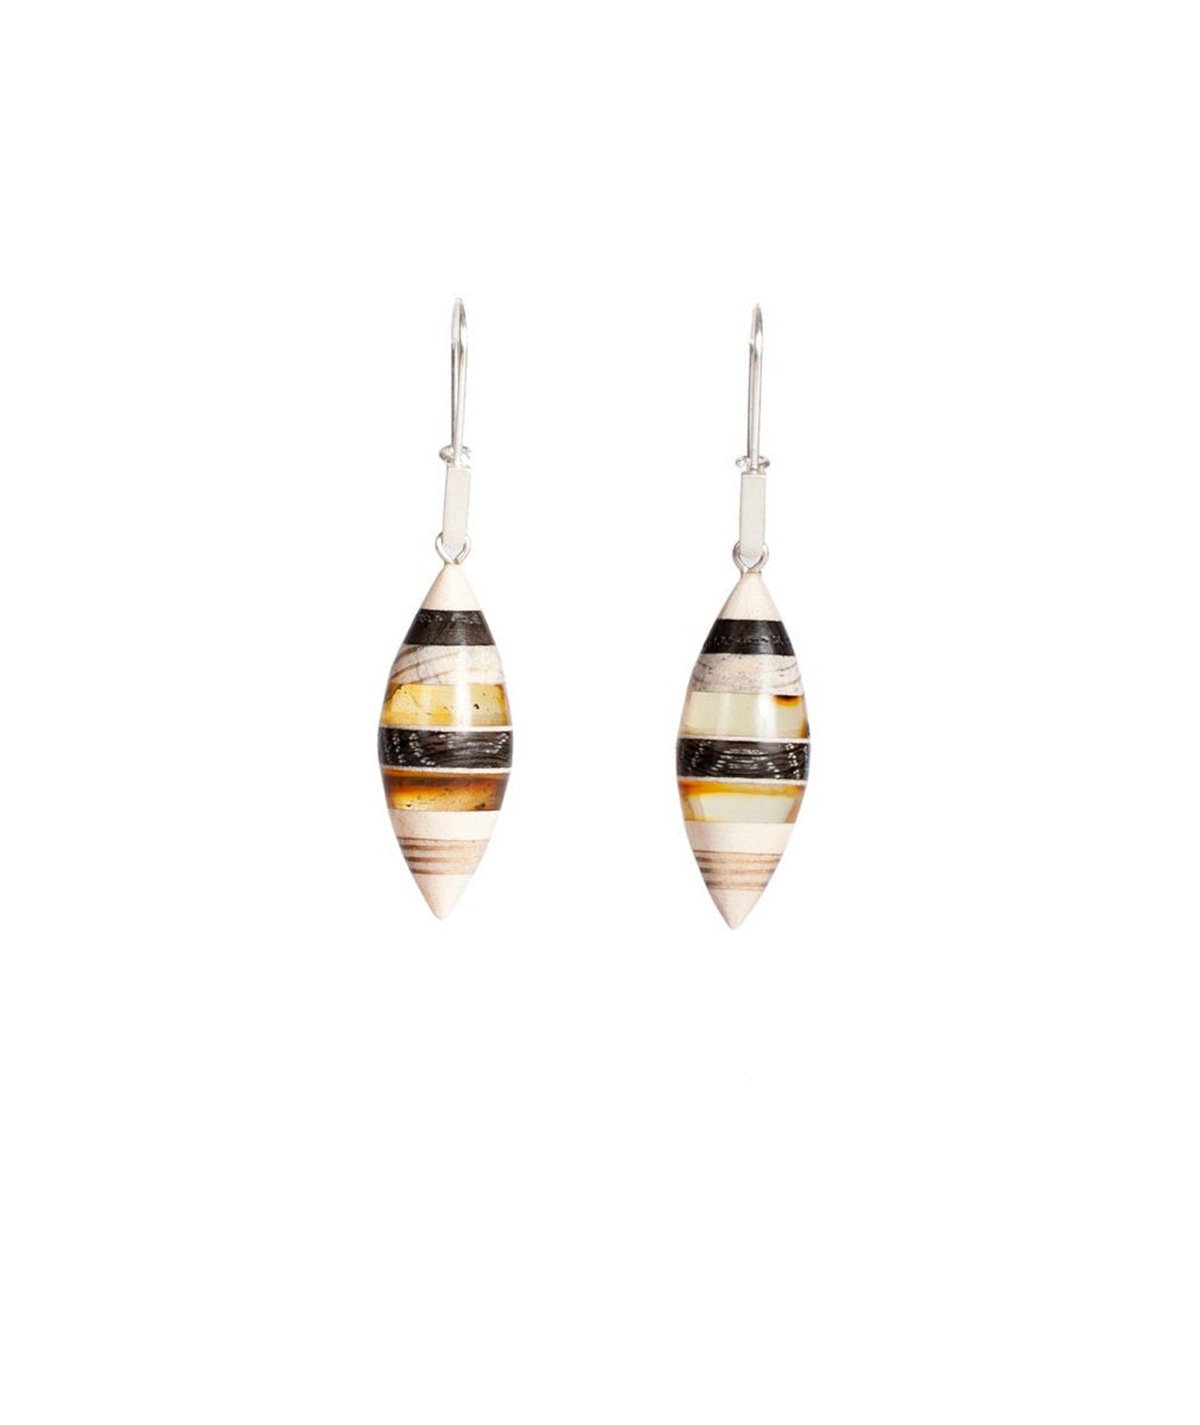 Earrings made of amber and wood on silver hooks.